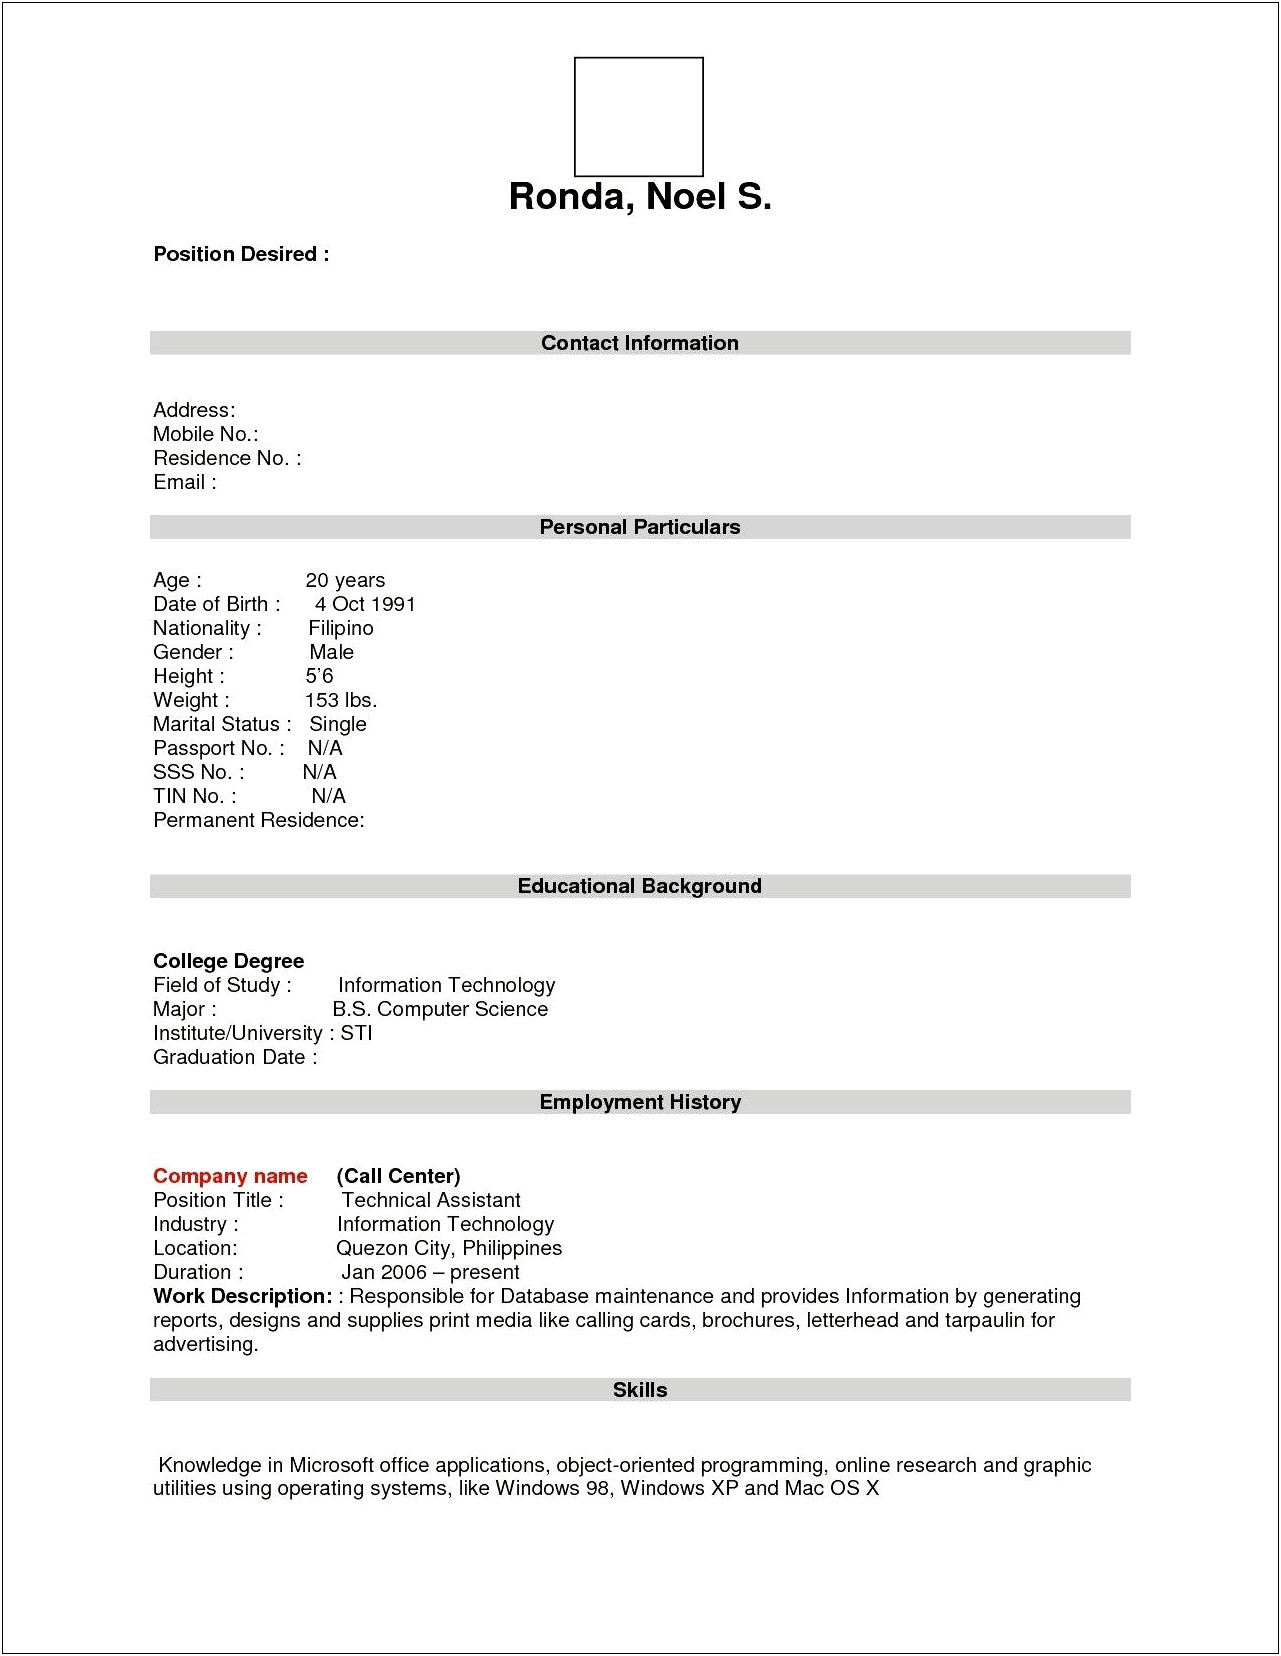 Resume Wizard Free Download For Windows Xp